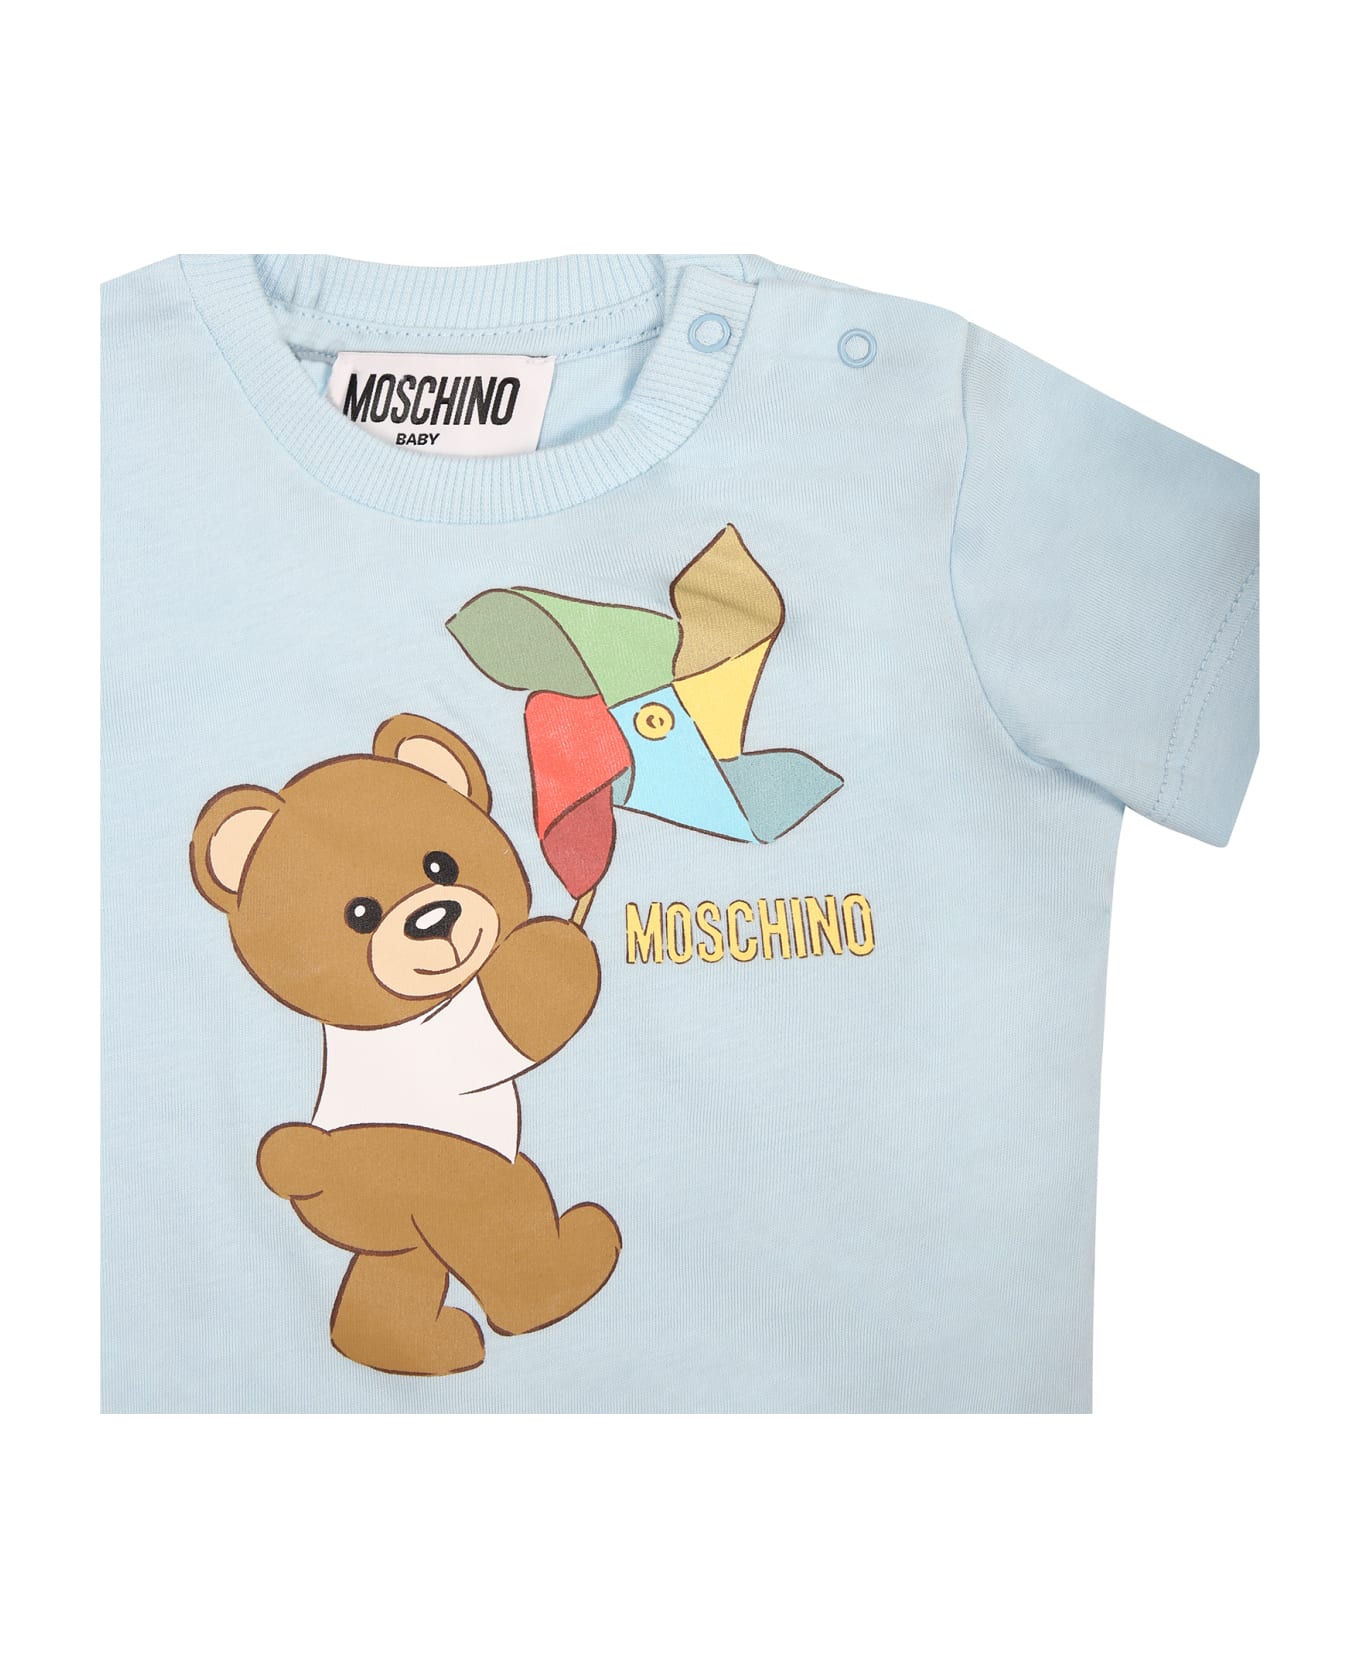 Moschino Light Blue Bodysuit For Baby Boy With Teddy Bear And Pinwheel - Light Blue ボディスーツ＆セットアップ